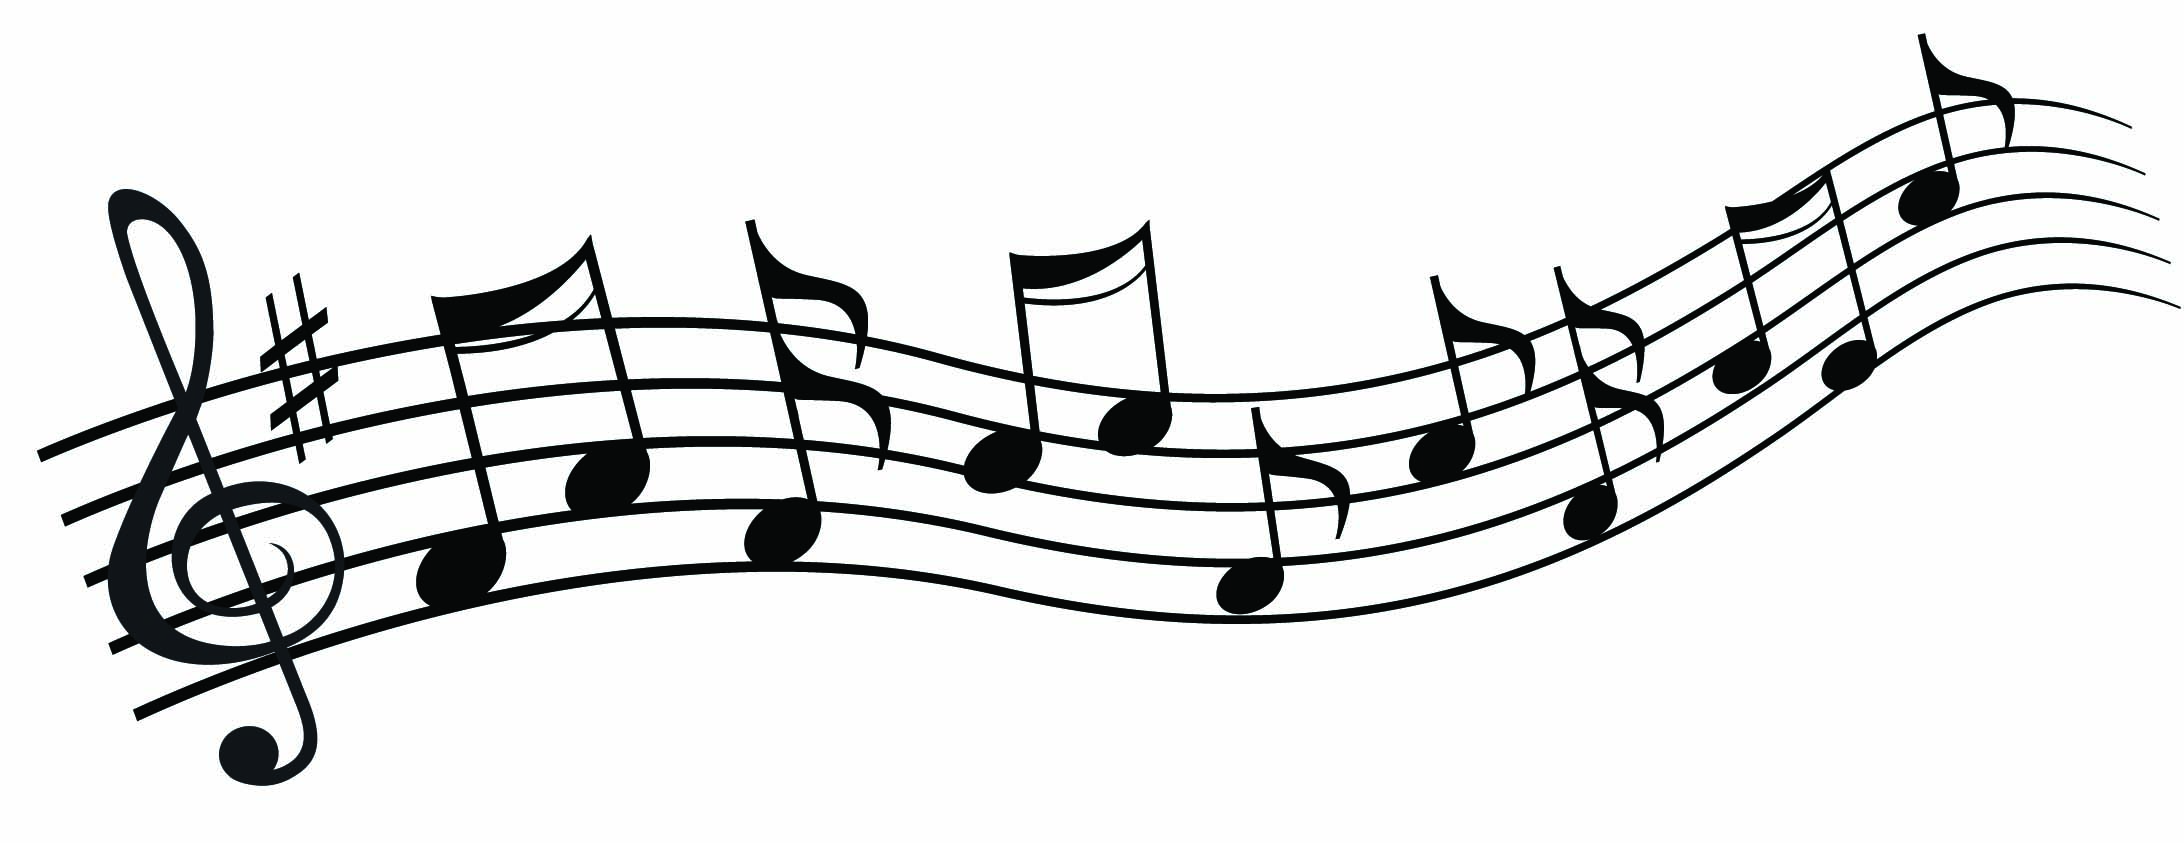 Clip art musical notes music clipart free music images